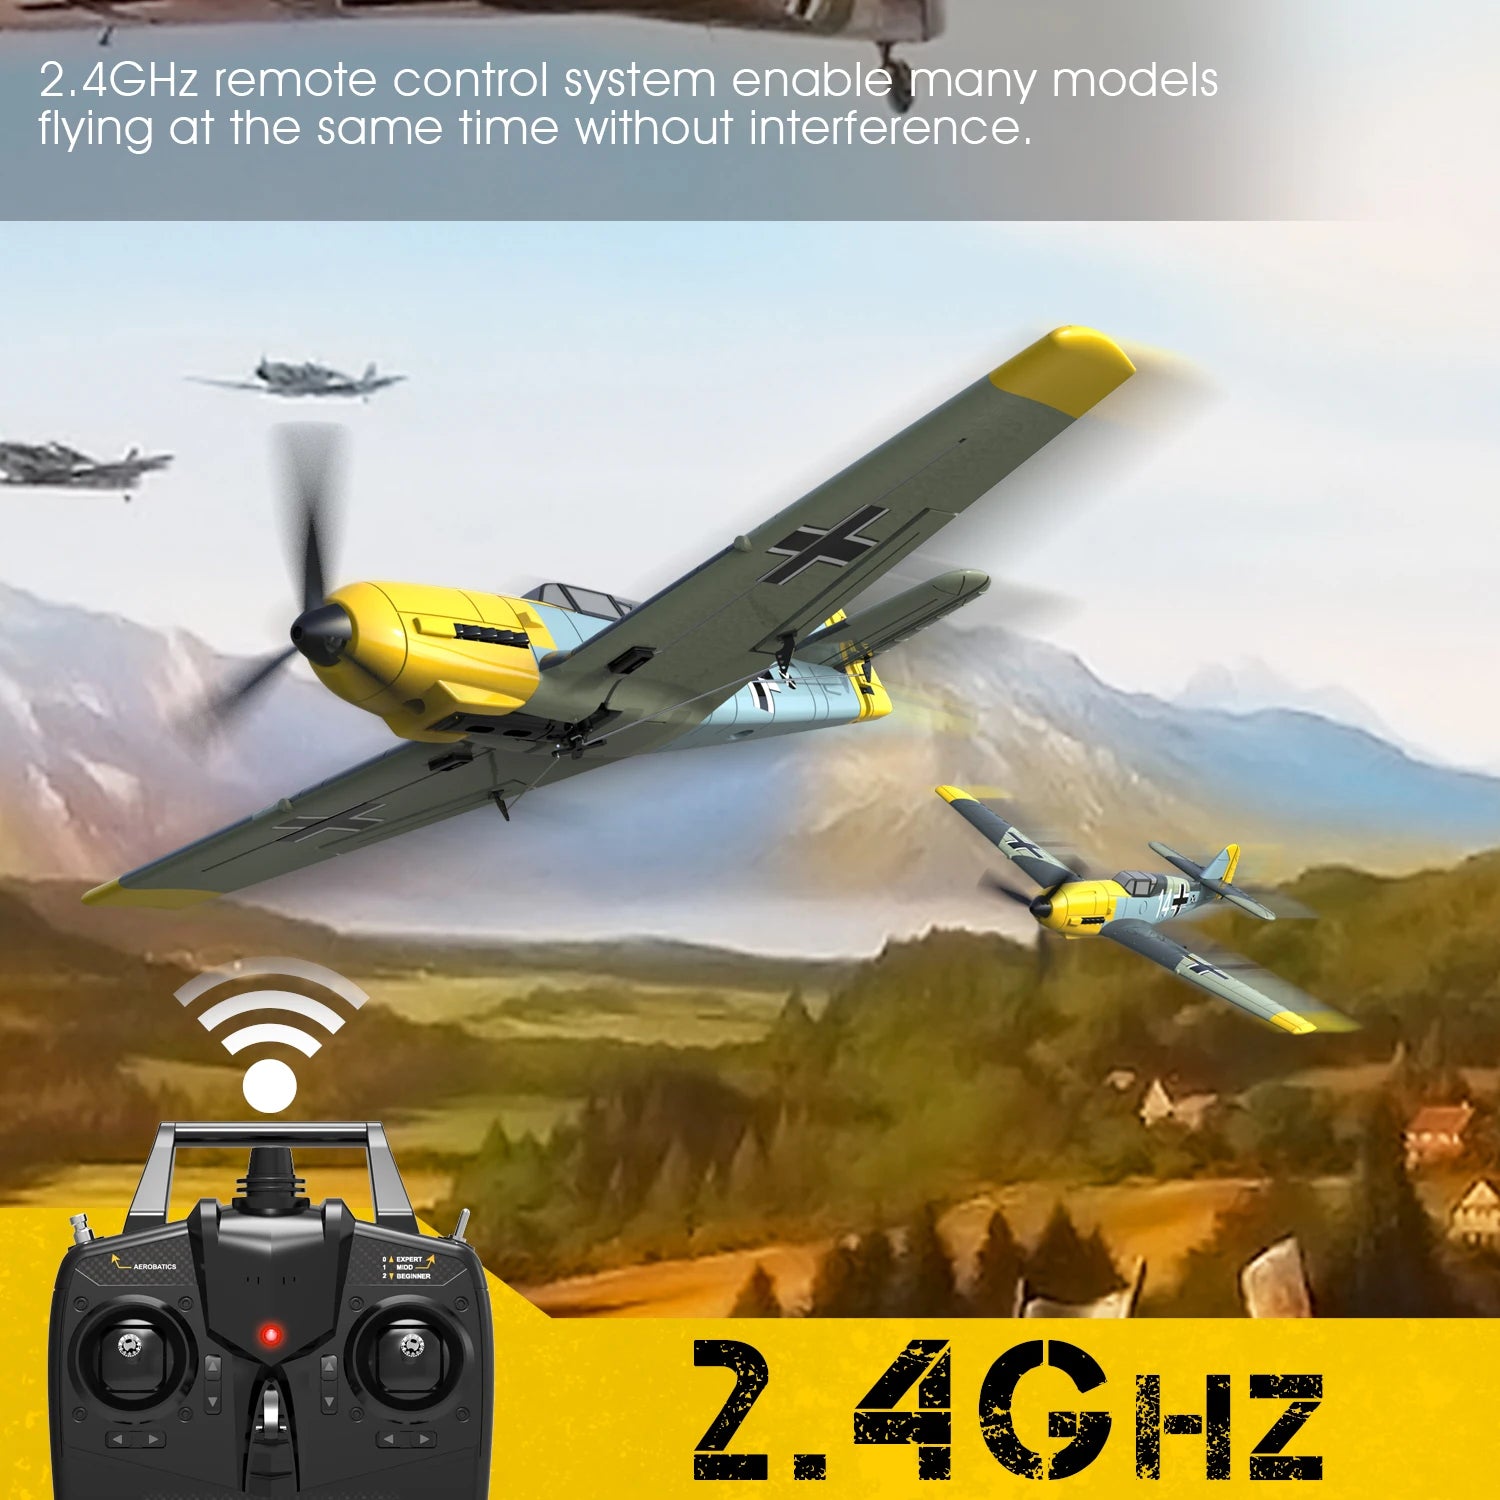 Volantex RC BF109 Airplane, 2.4GHz remote control system enable many models flying at the same time without interference; Fhem